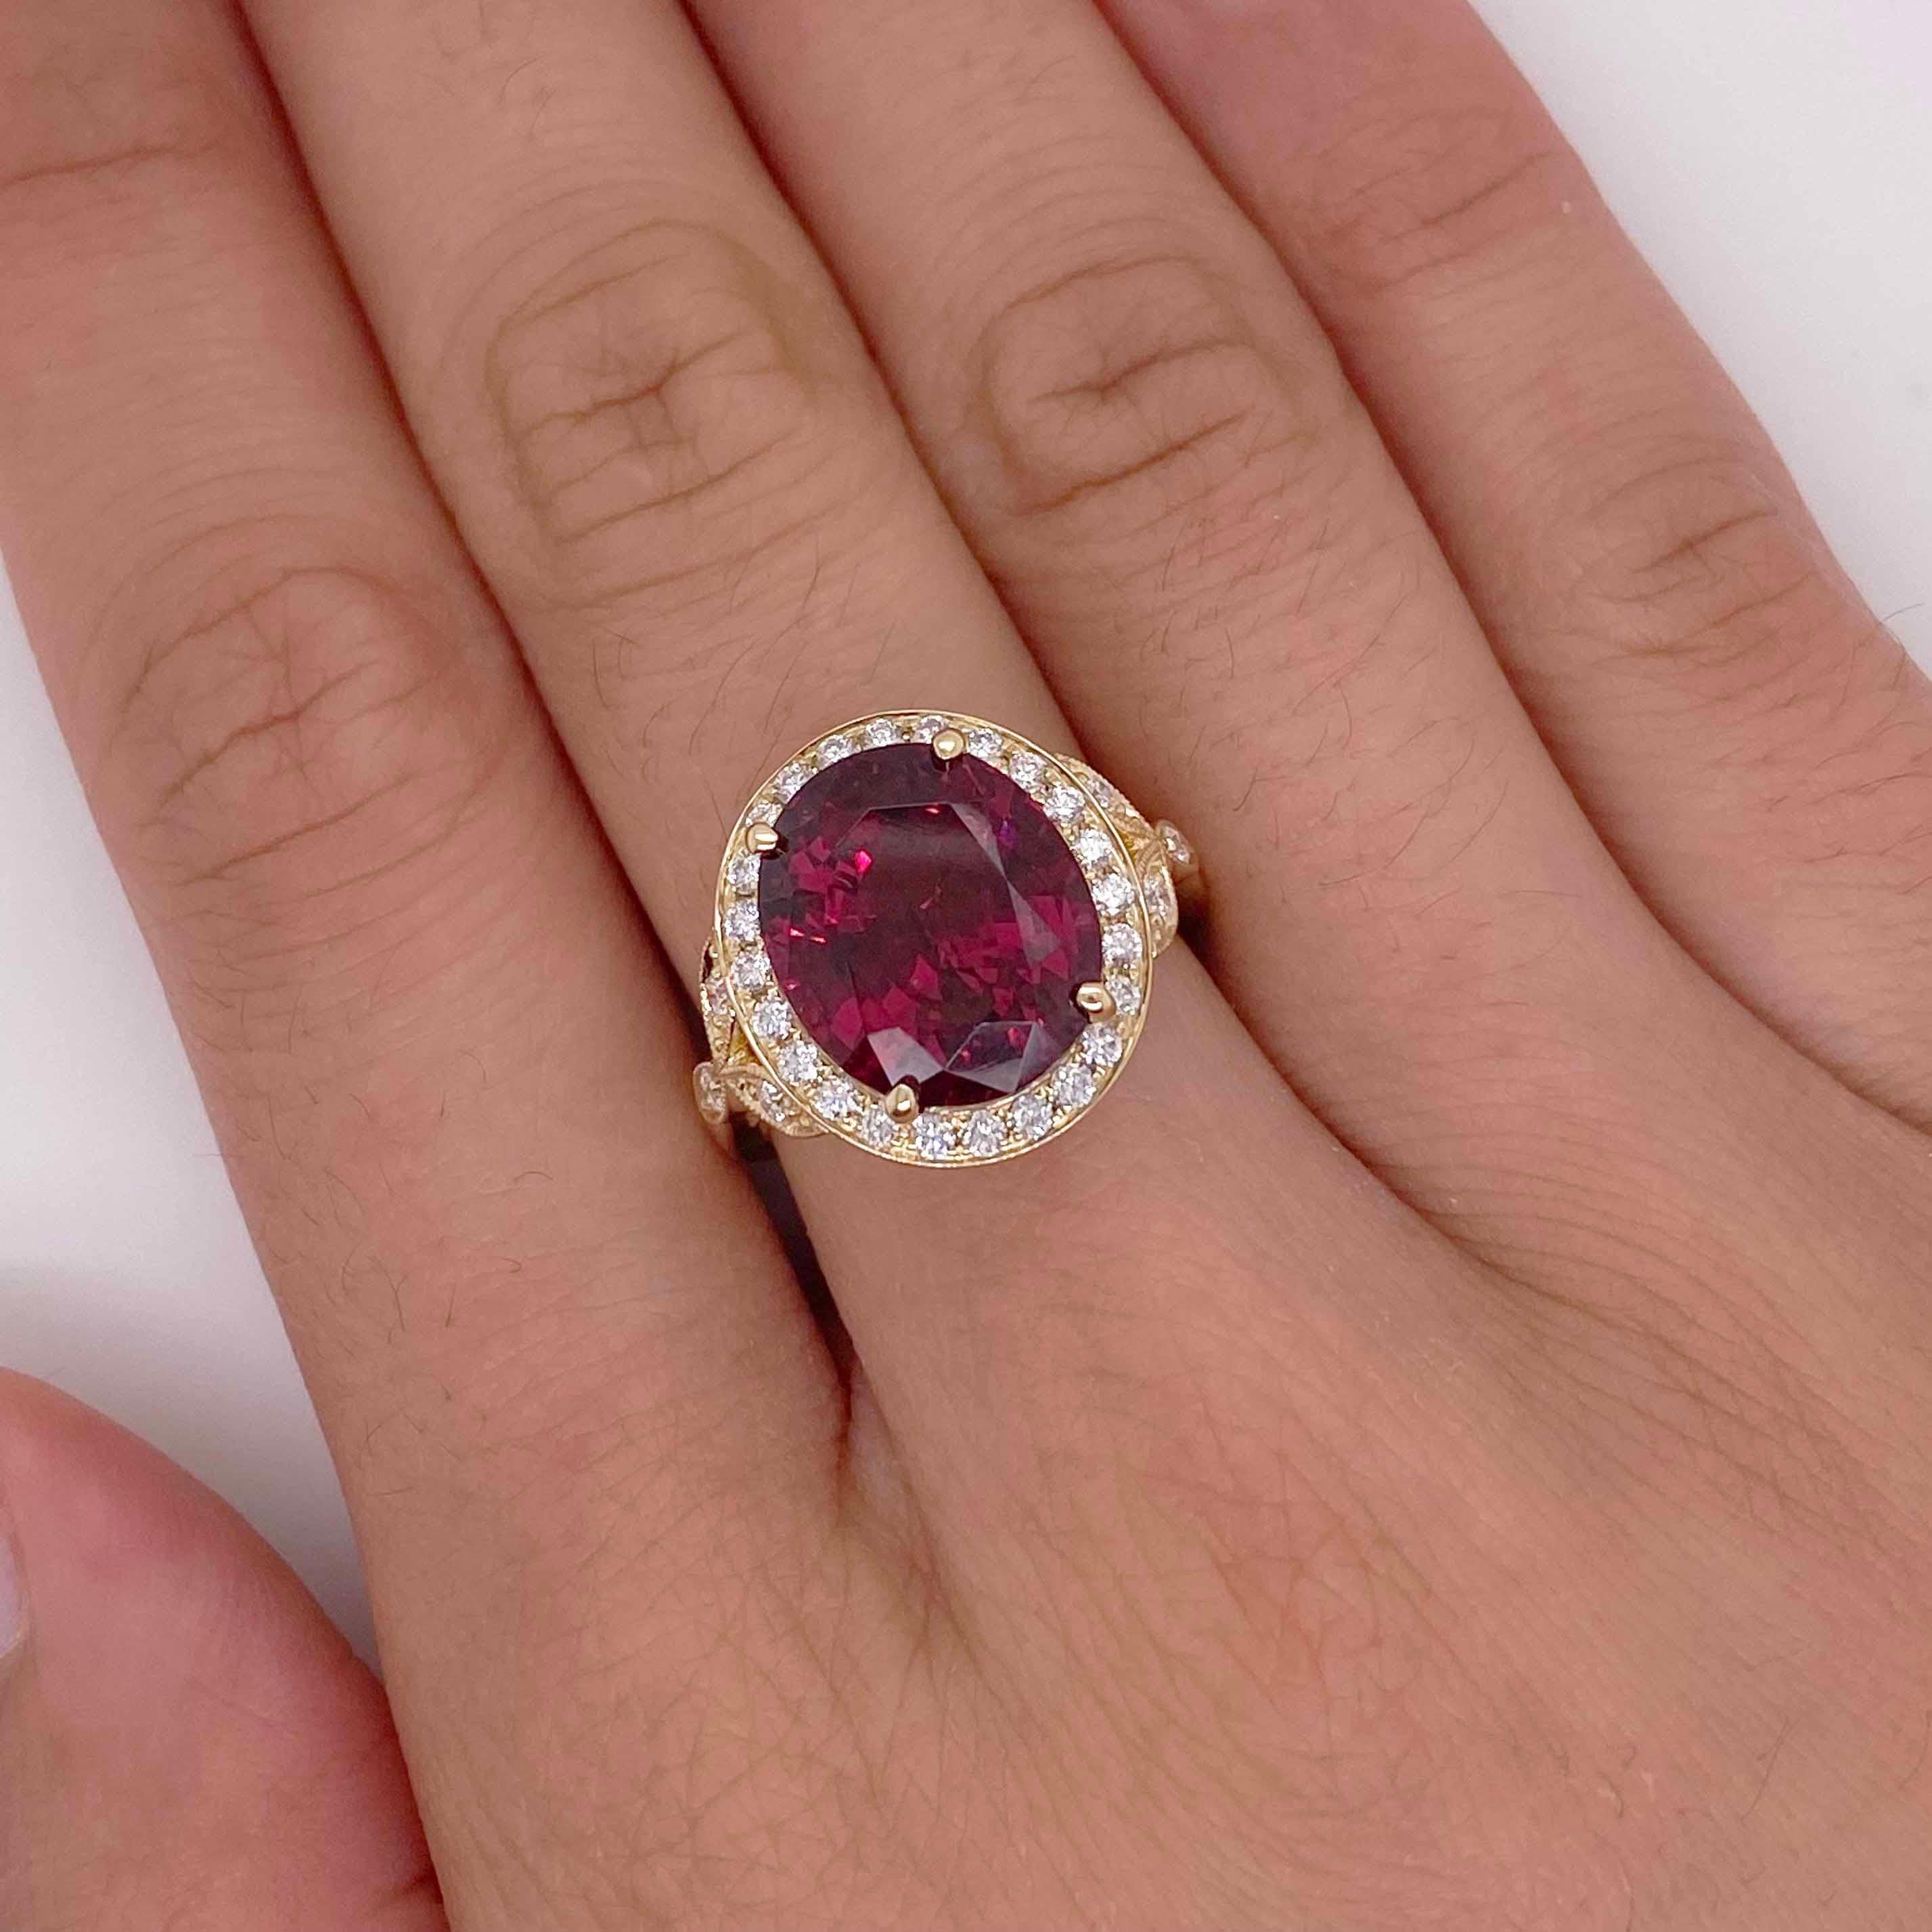 For Sale:  Garnet Diamond Ring, Yellow Gold, One-of-a-Kind 9.37Ct Garnet and Diamond Halo 4